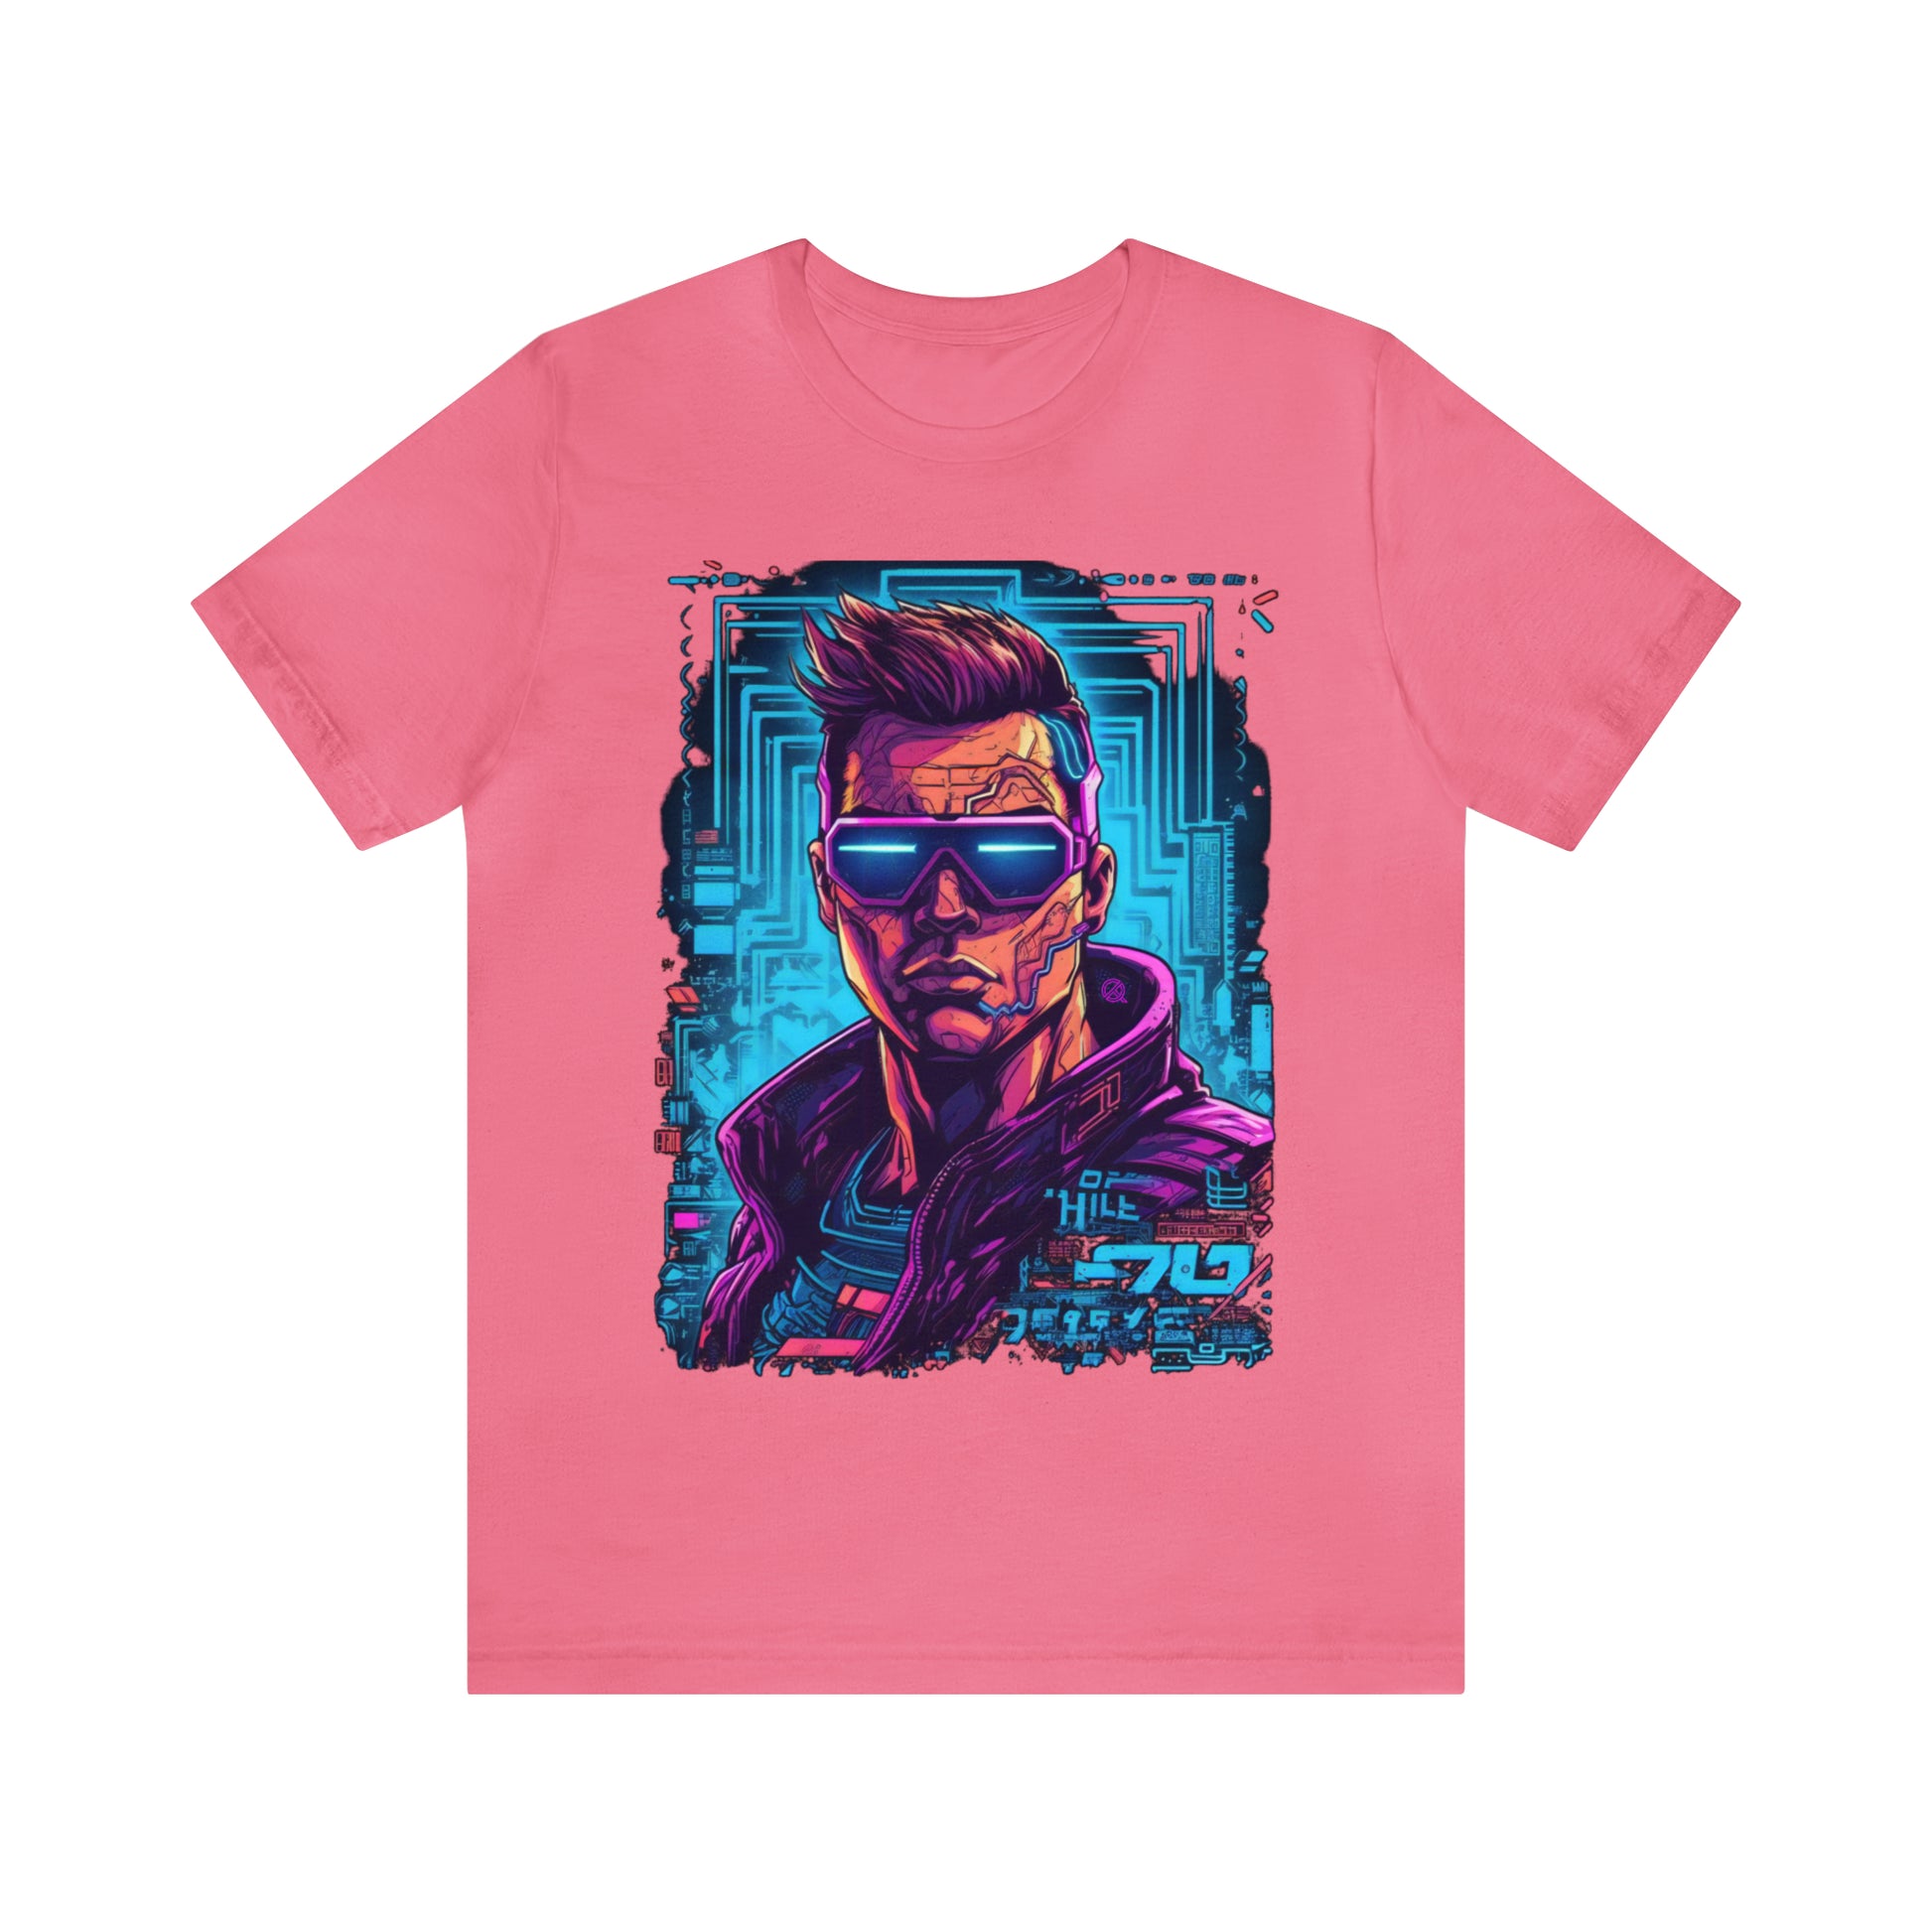 charity-pink-quest-thread-tee-shirt-with-large-neon-cyber-punk-on-center